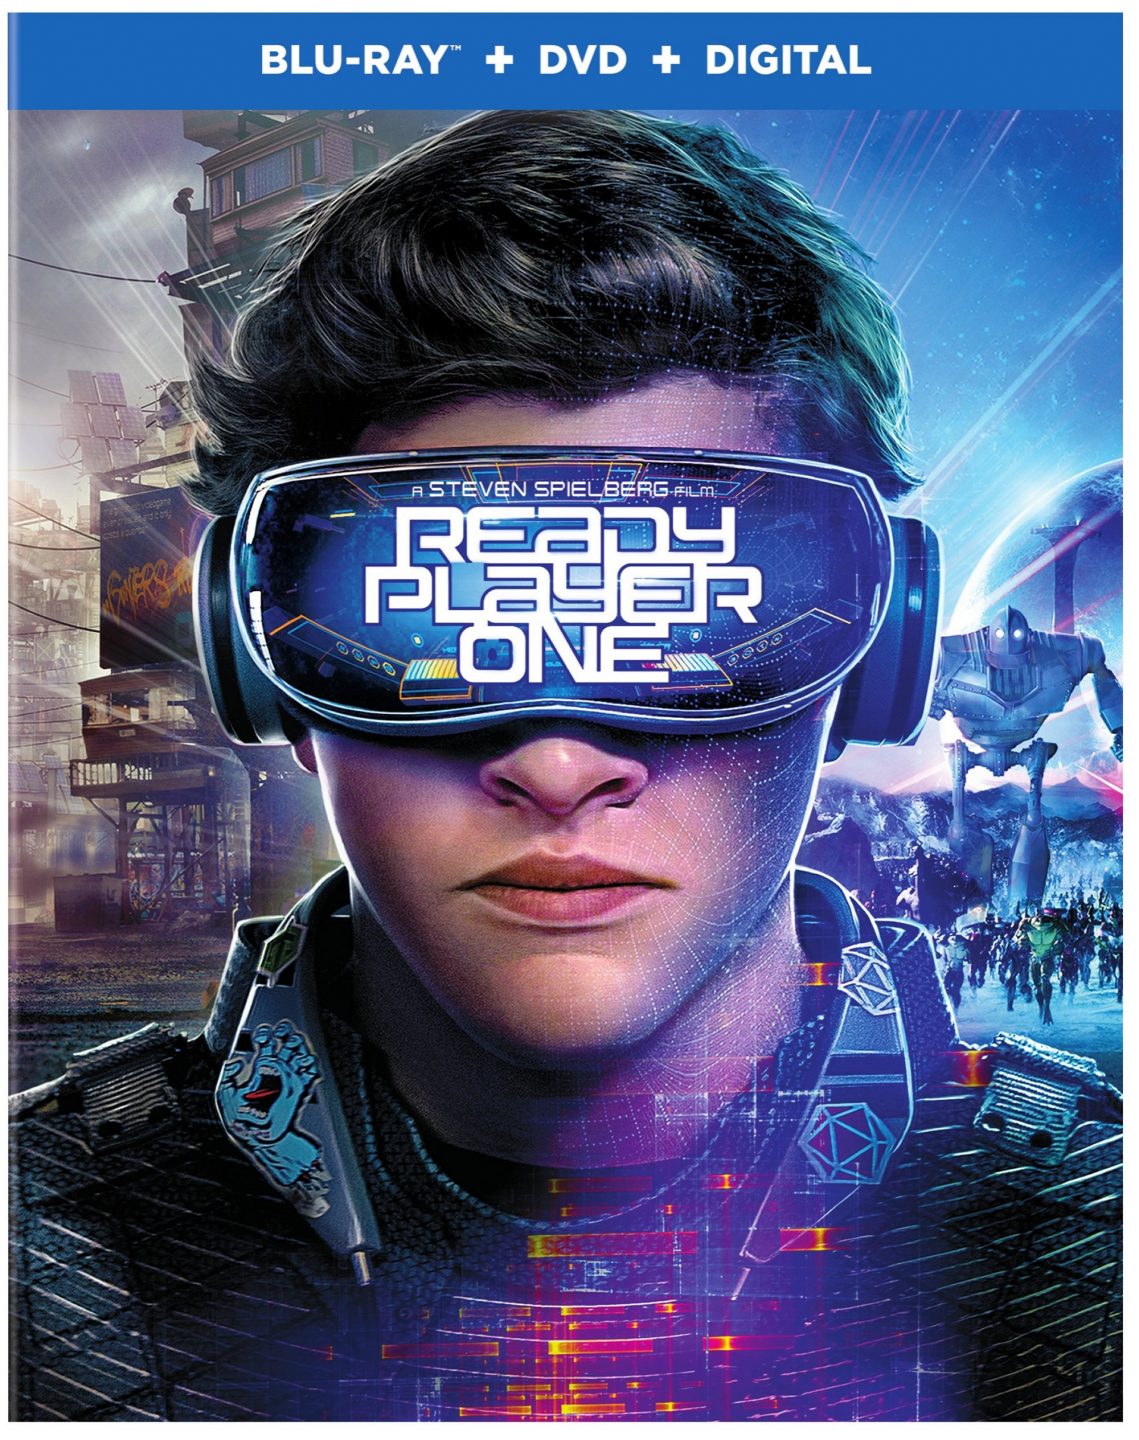 Ready Player One Blu-Ray Combo Pack cover (Warner Bros. Home Entertainment)